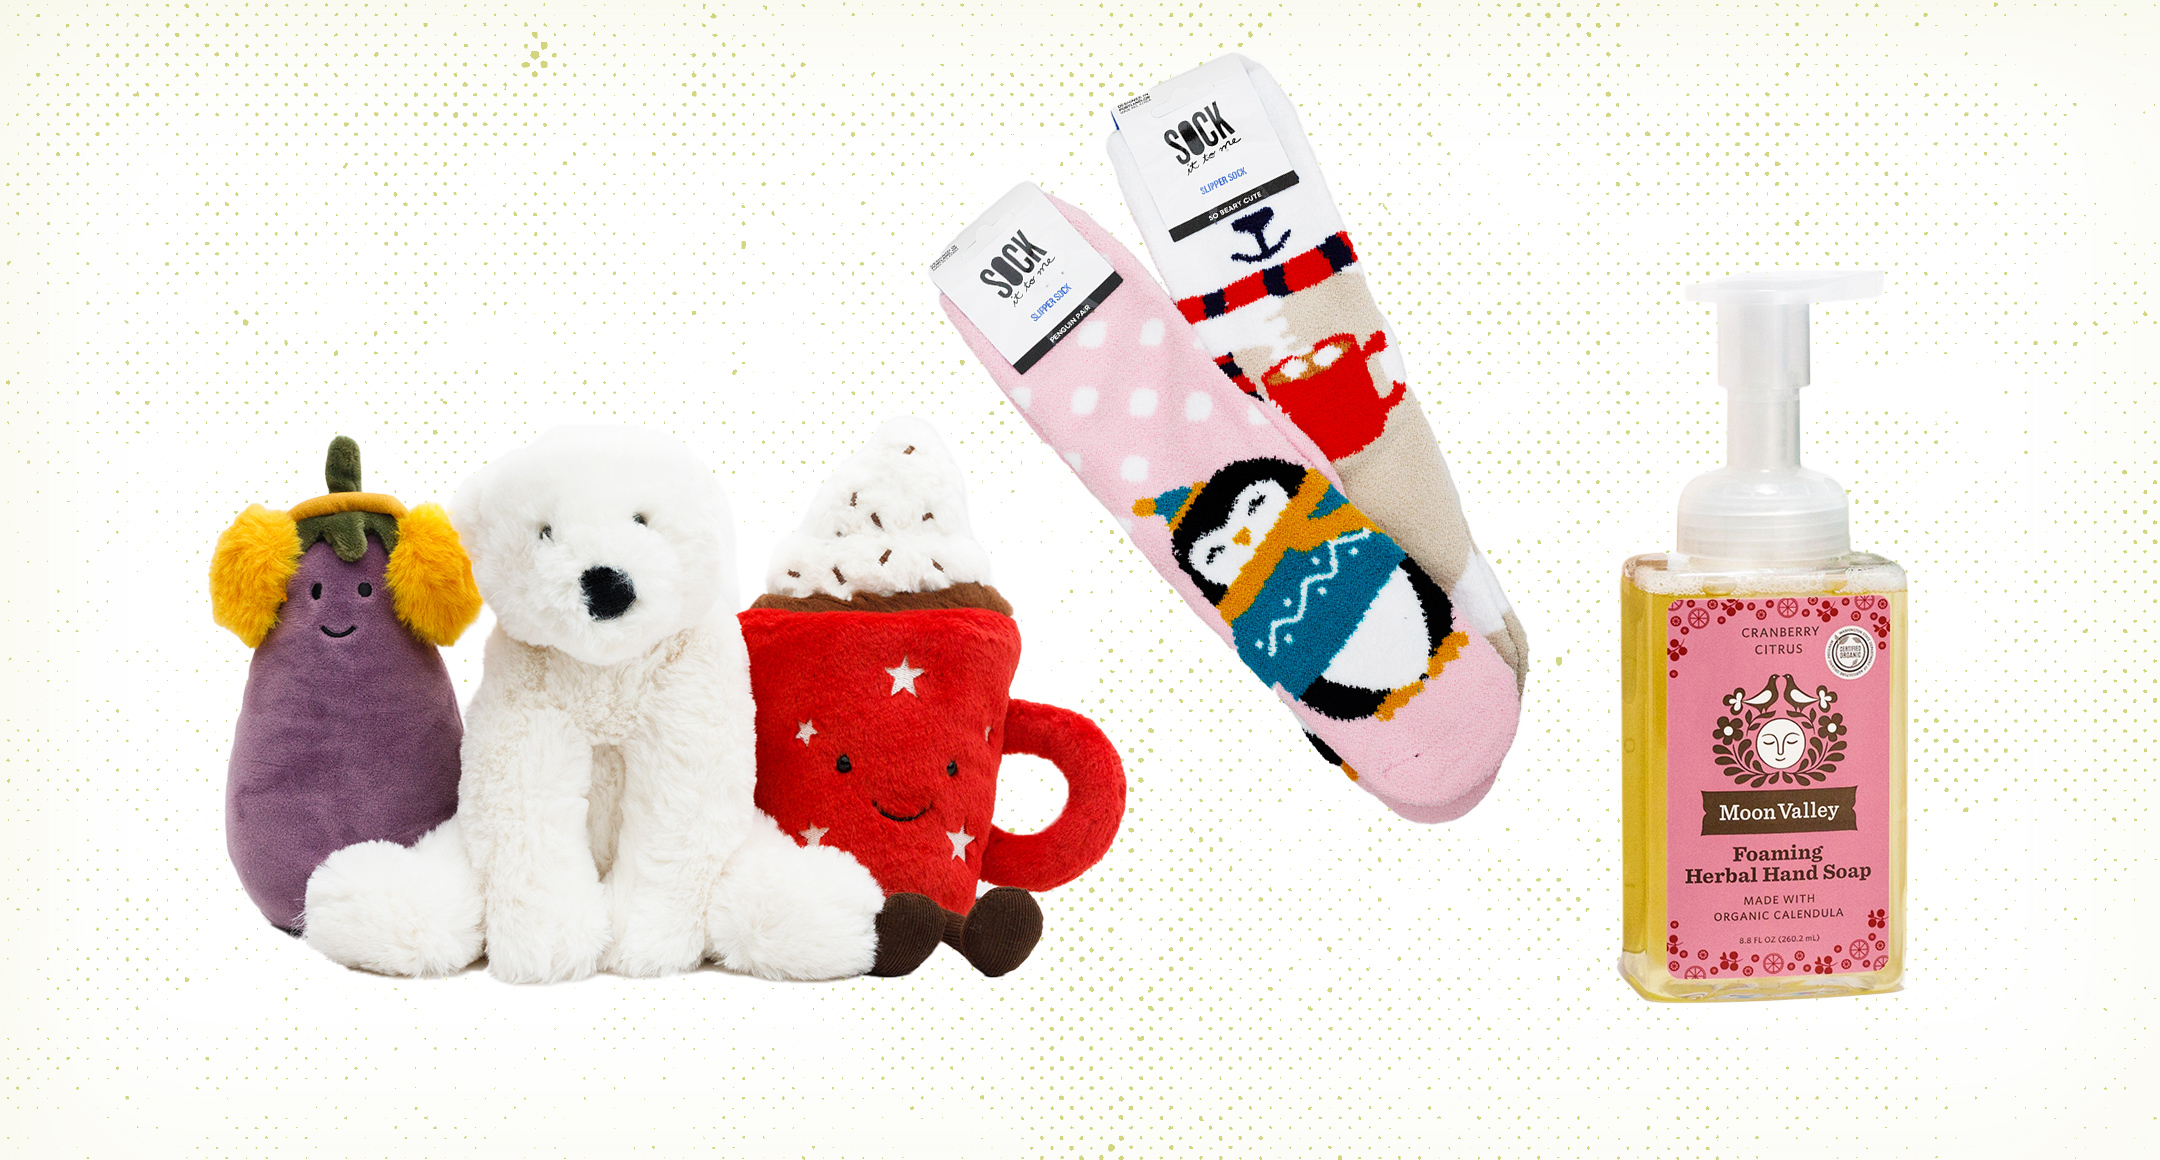 Stocking stuffers, including three plush stuffed toys, cozy socks with holiday designs, and scented liquid hand soap.